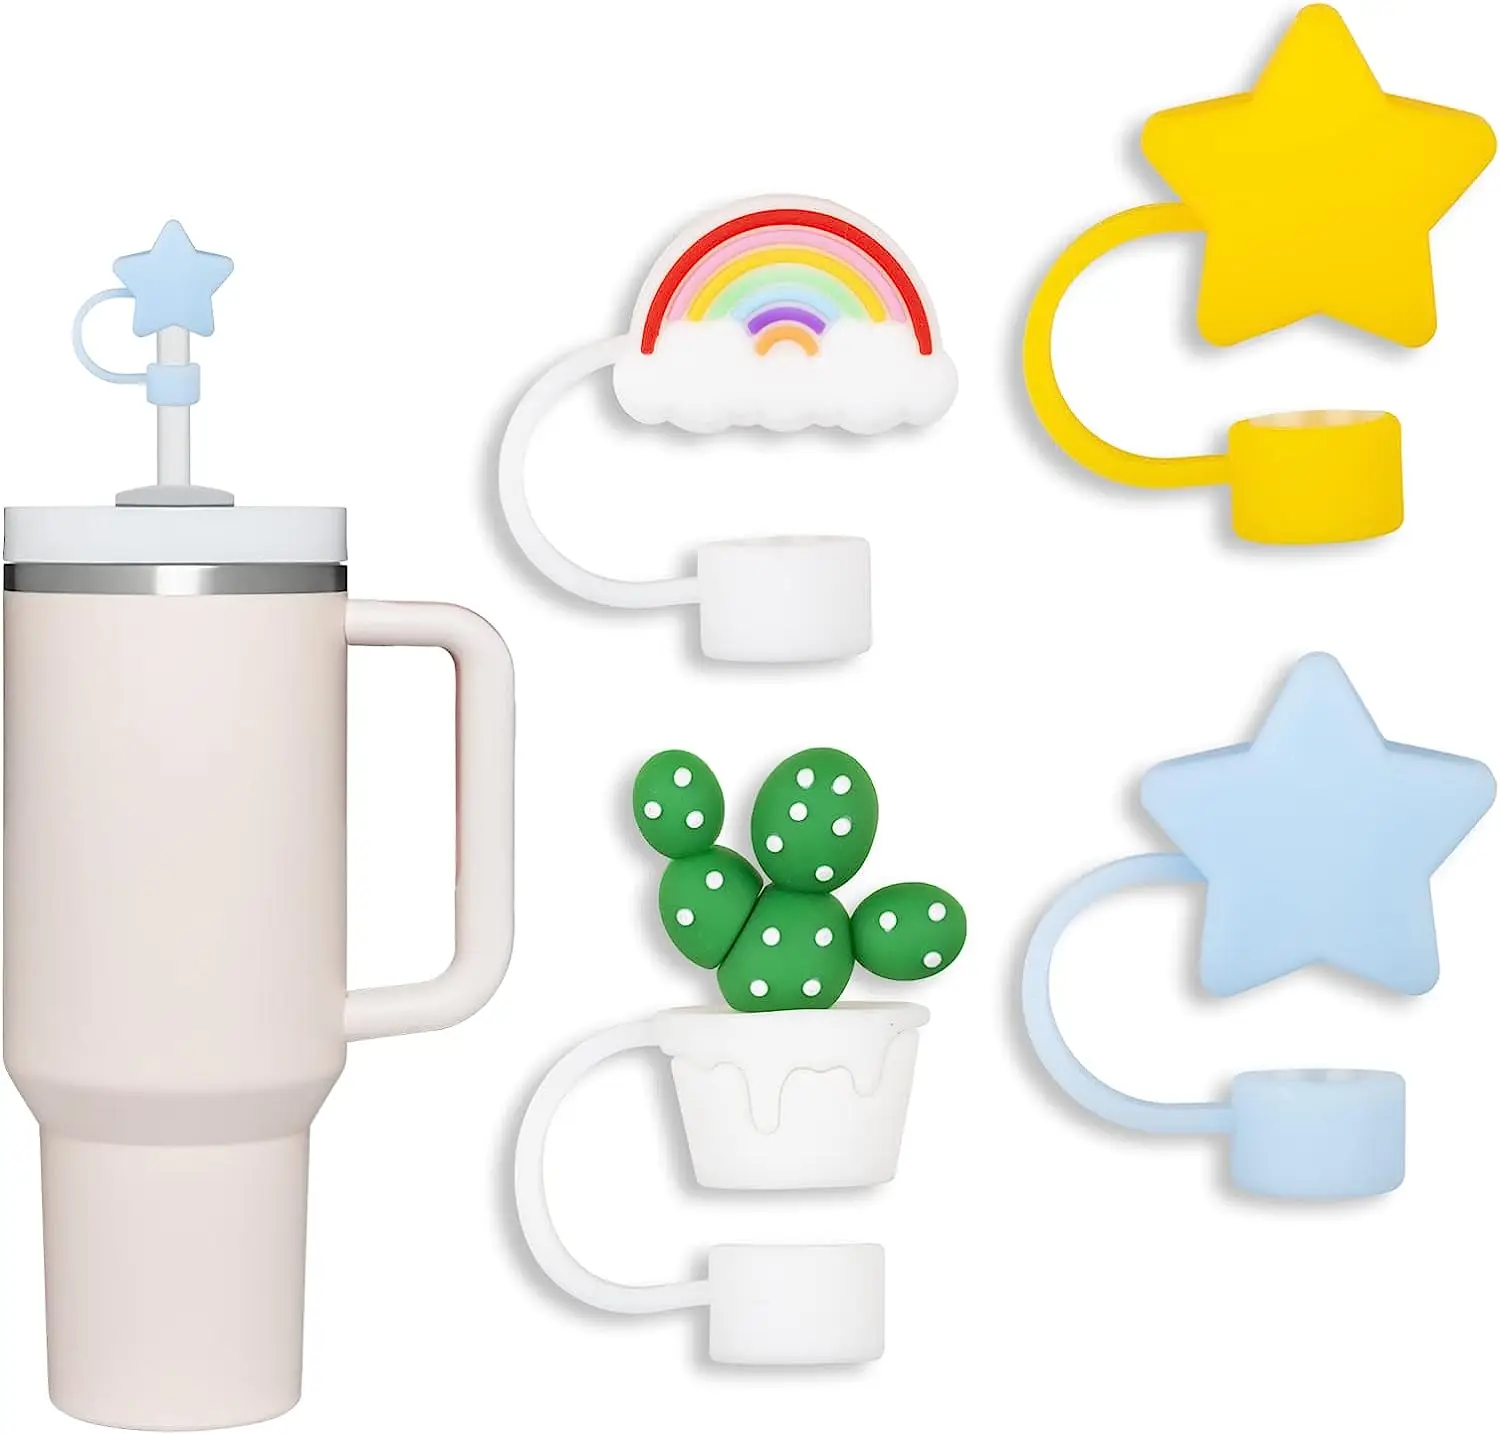 https://ae01.alicdn.com/kf/Sc61c61bff7ae4942b79acac394ff6a8an/3-Pack-Compatible-with-Stanley-30-40-Oz-Tumbler-10mm-Cloud-Shape-Straw-Covers-Cap-Cute.jpg